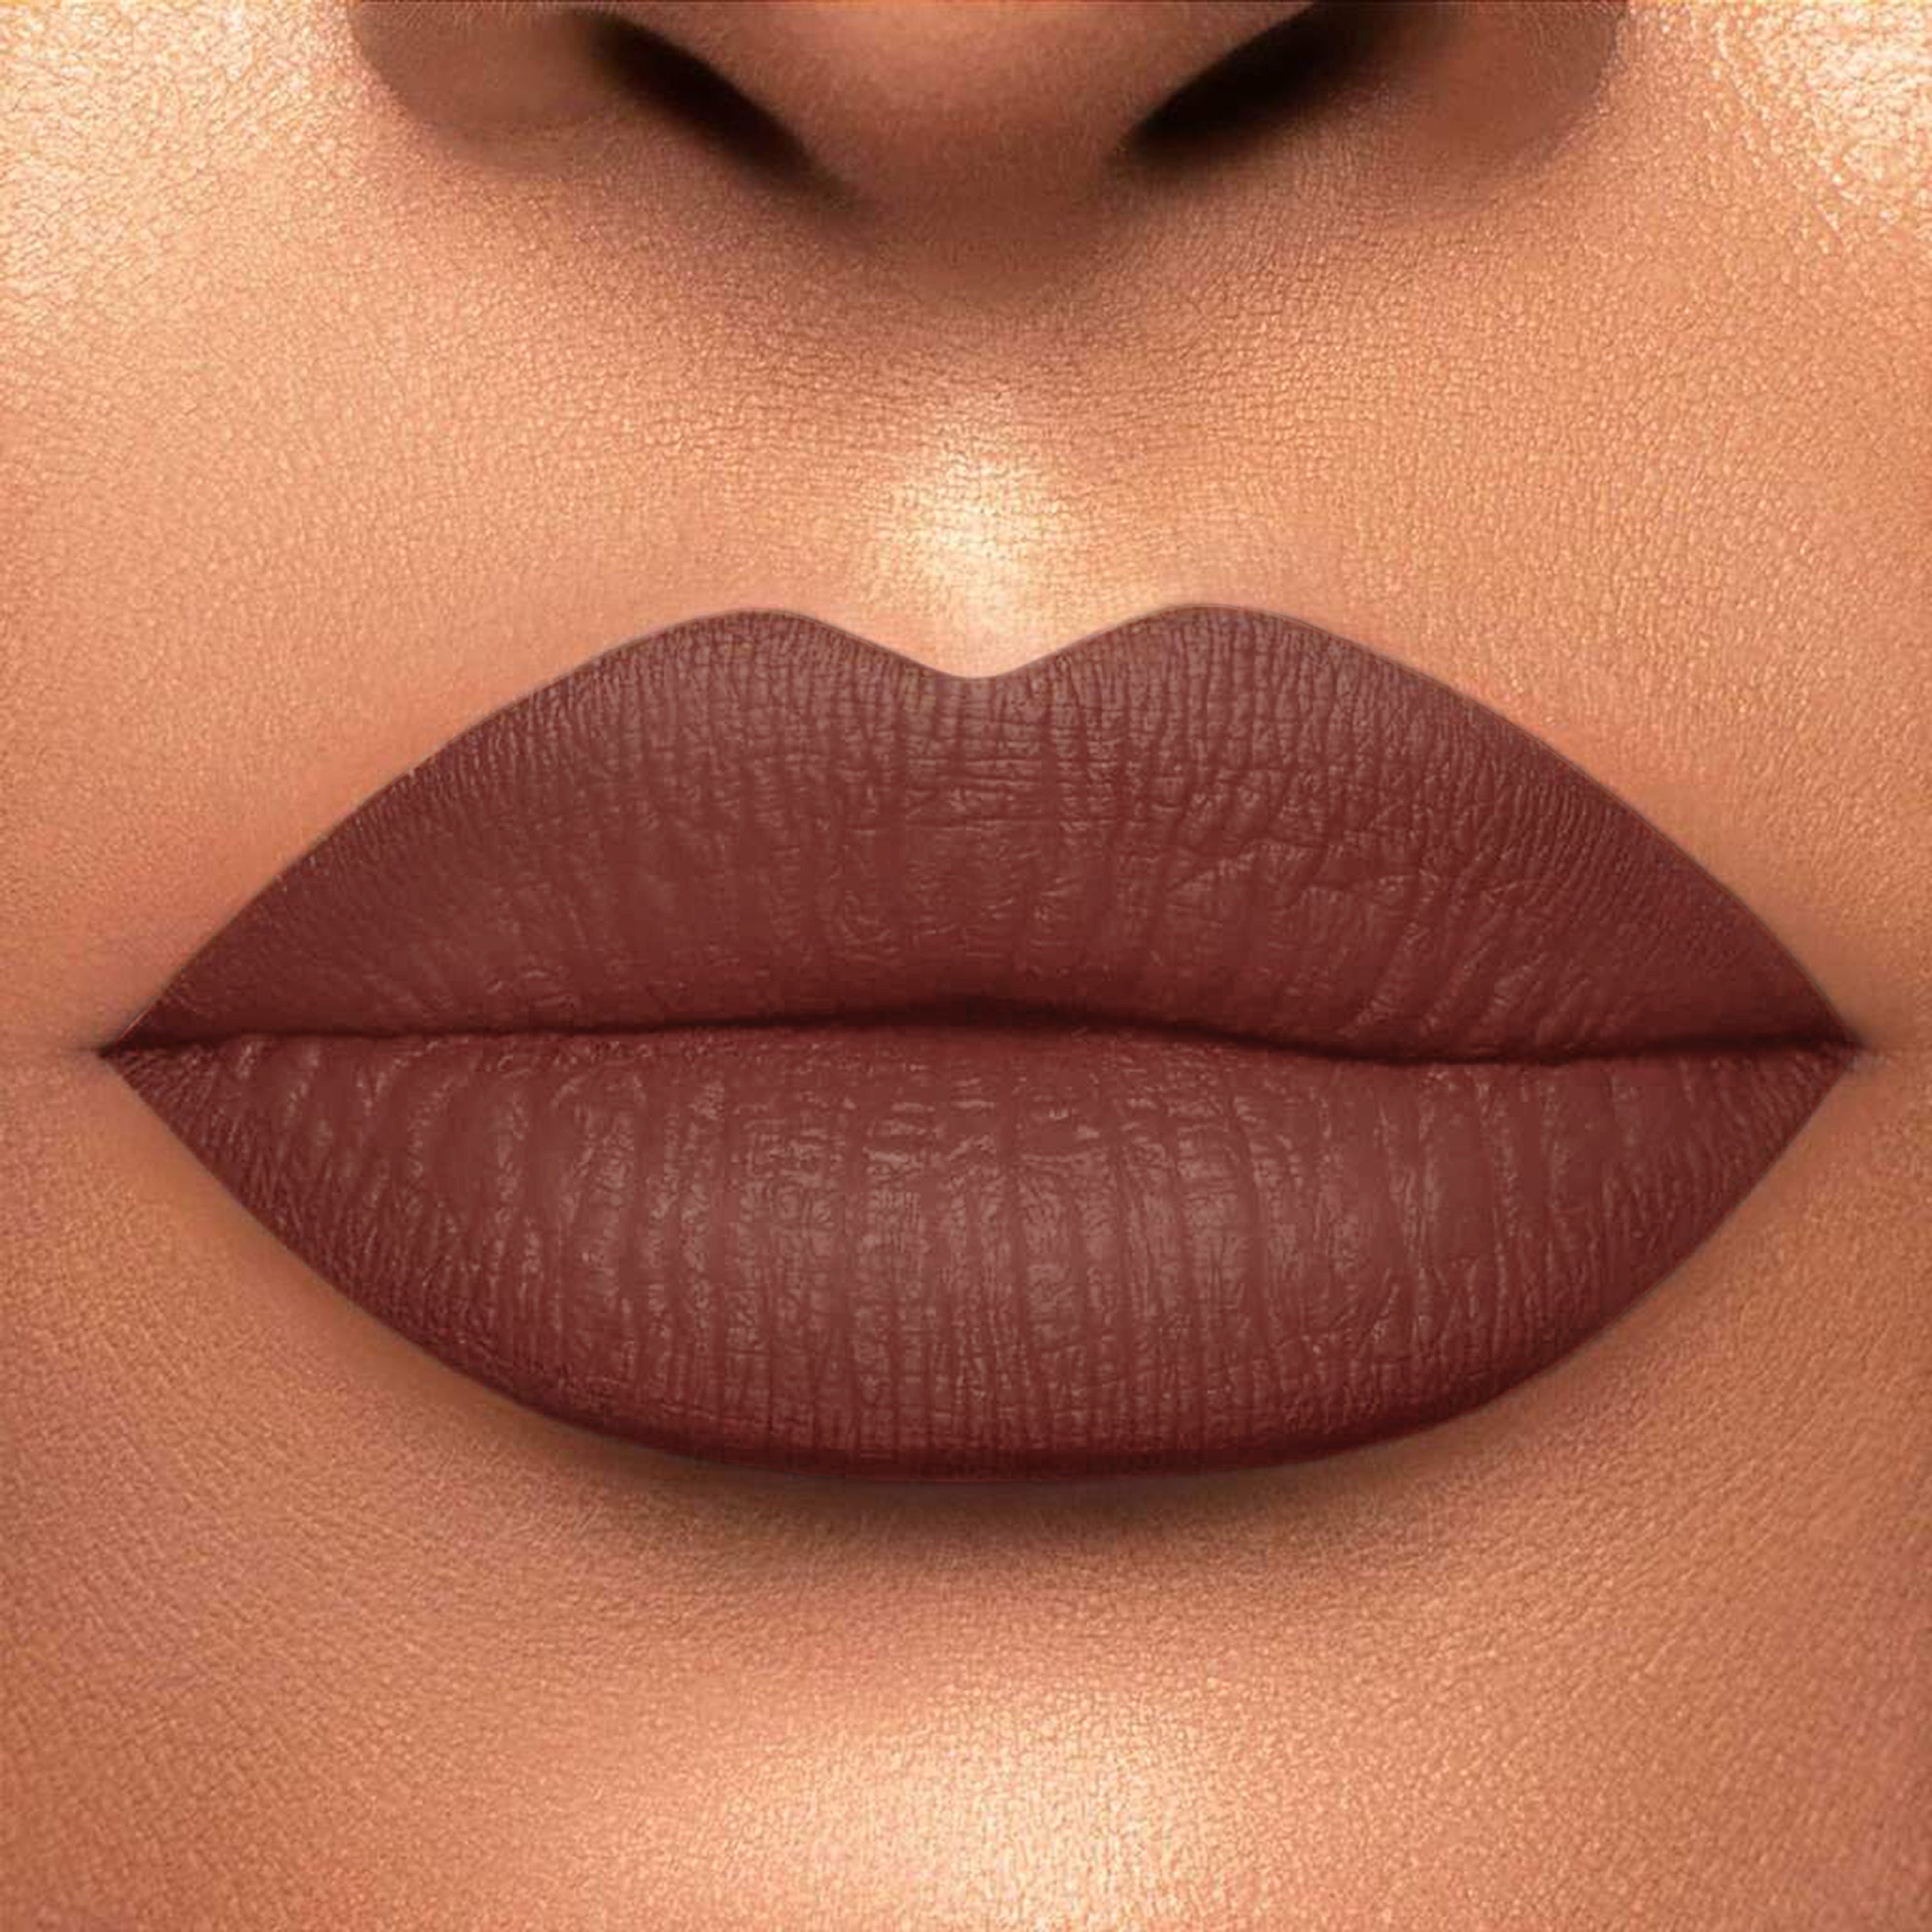 Ambitious is a vegan mattifying lipstick that's made with quality ingredients for long-lasting color and comfort. With its oil-absorbing properties, it'll provide yo